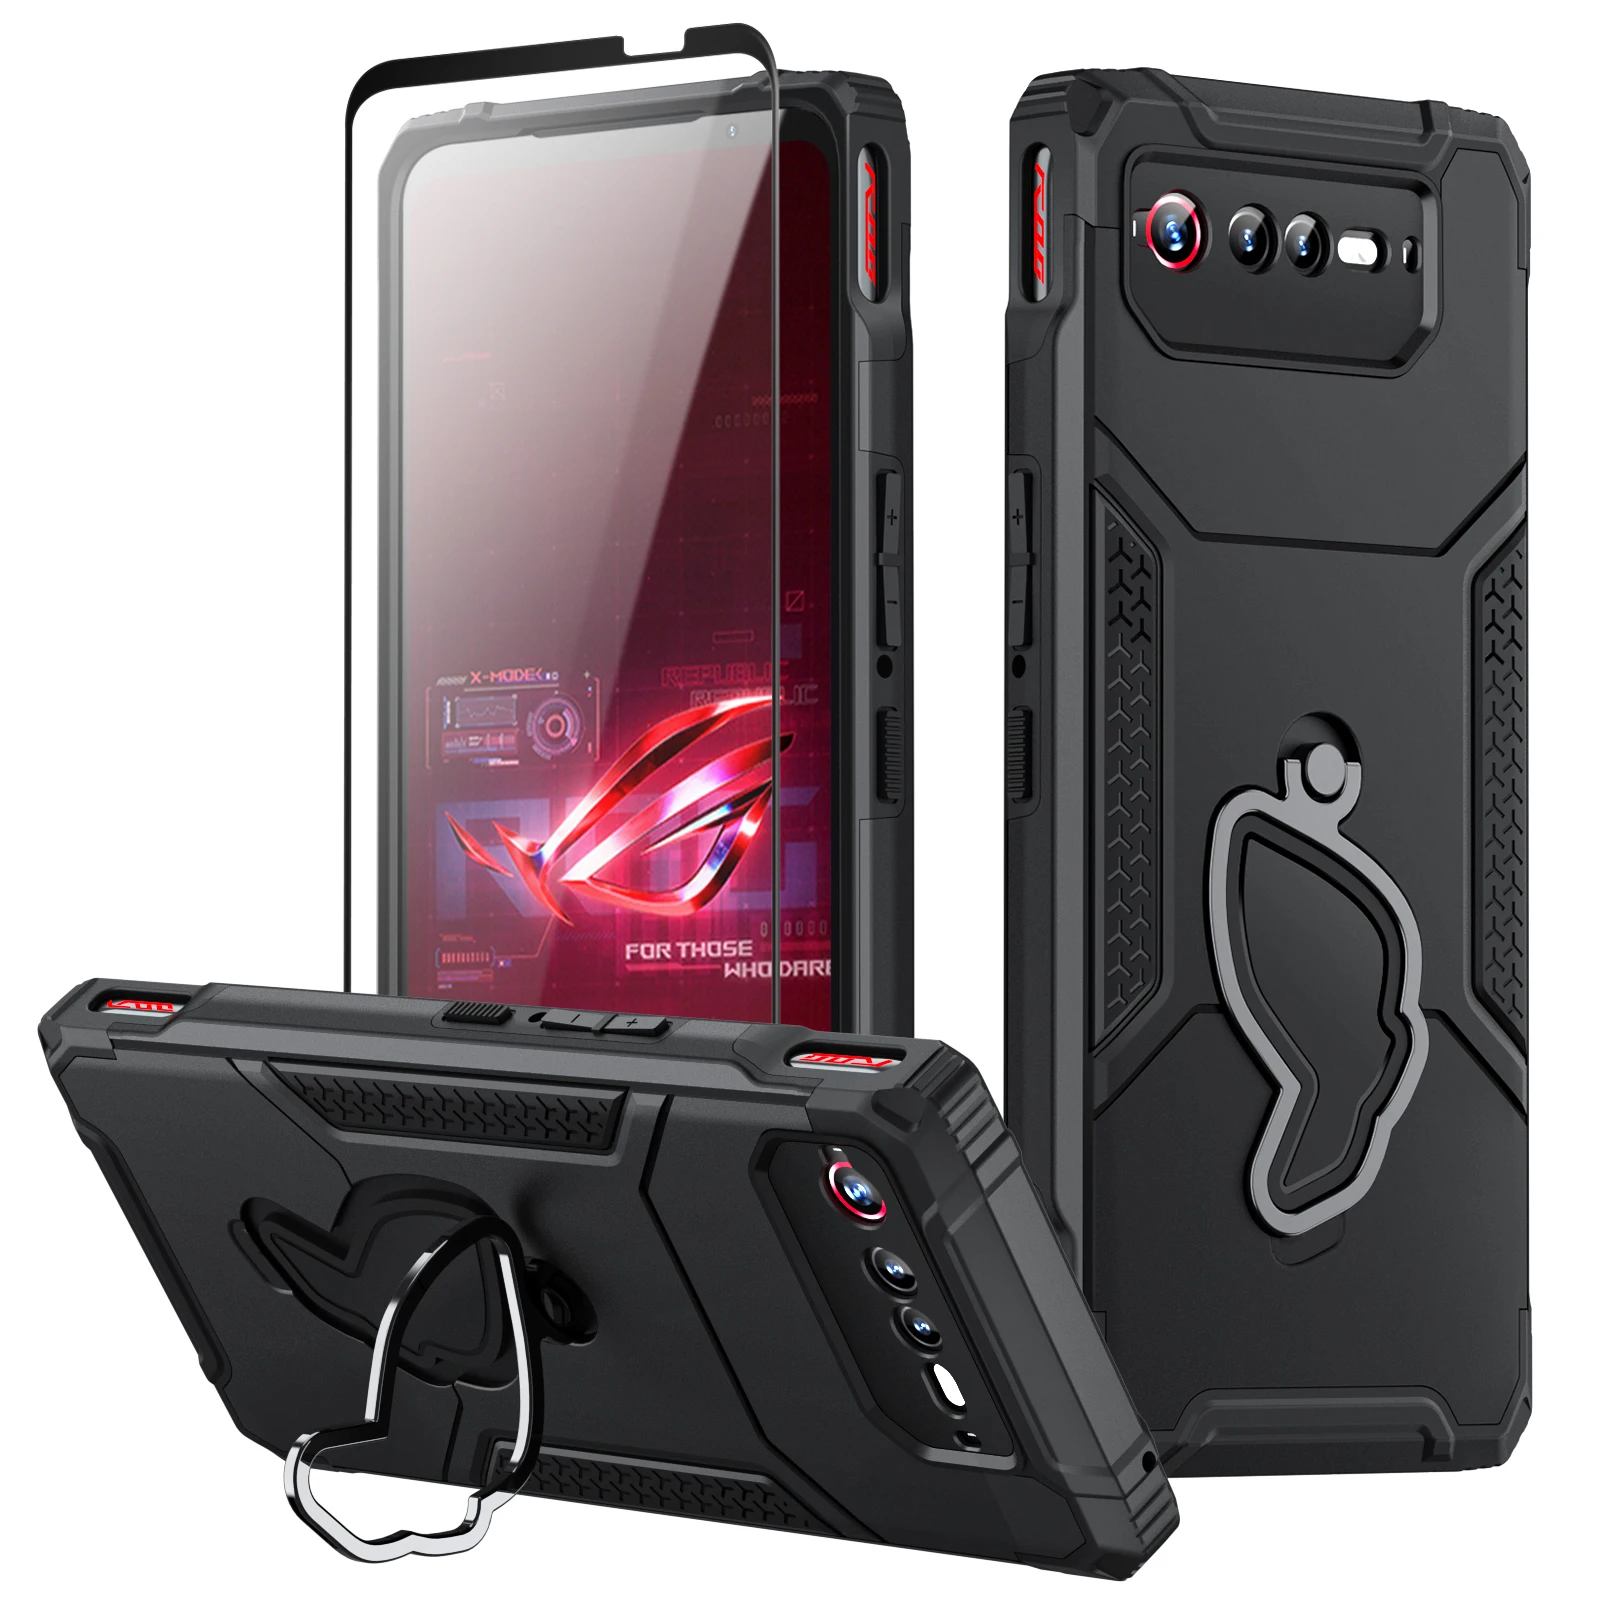 ZSHOW Armor Case For Asus ROG Phone 6 6D 5 5S Pro Ultimate Case Air Trigger Compatible With Kickstand Dust Plug Shockproof Cover 1